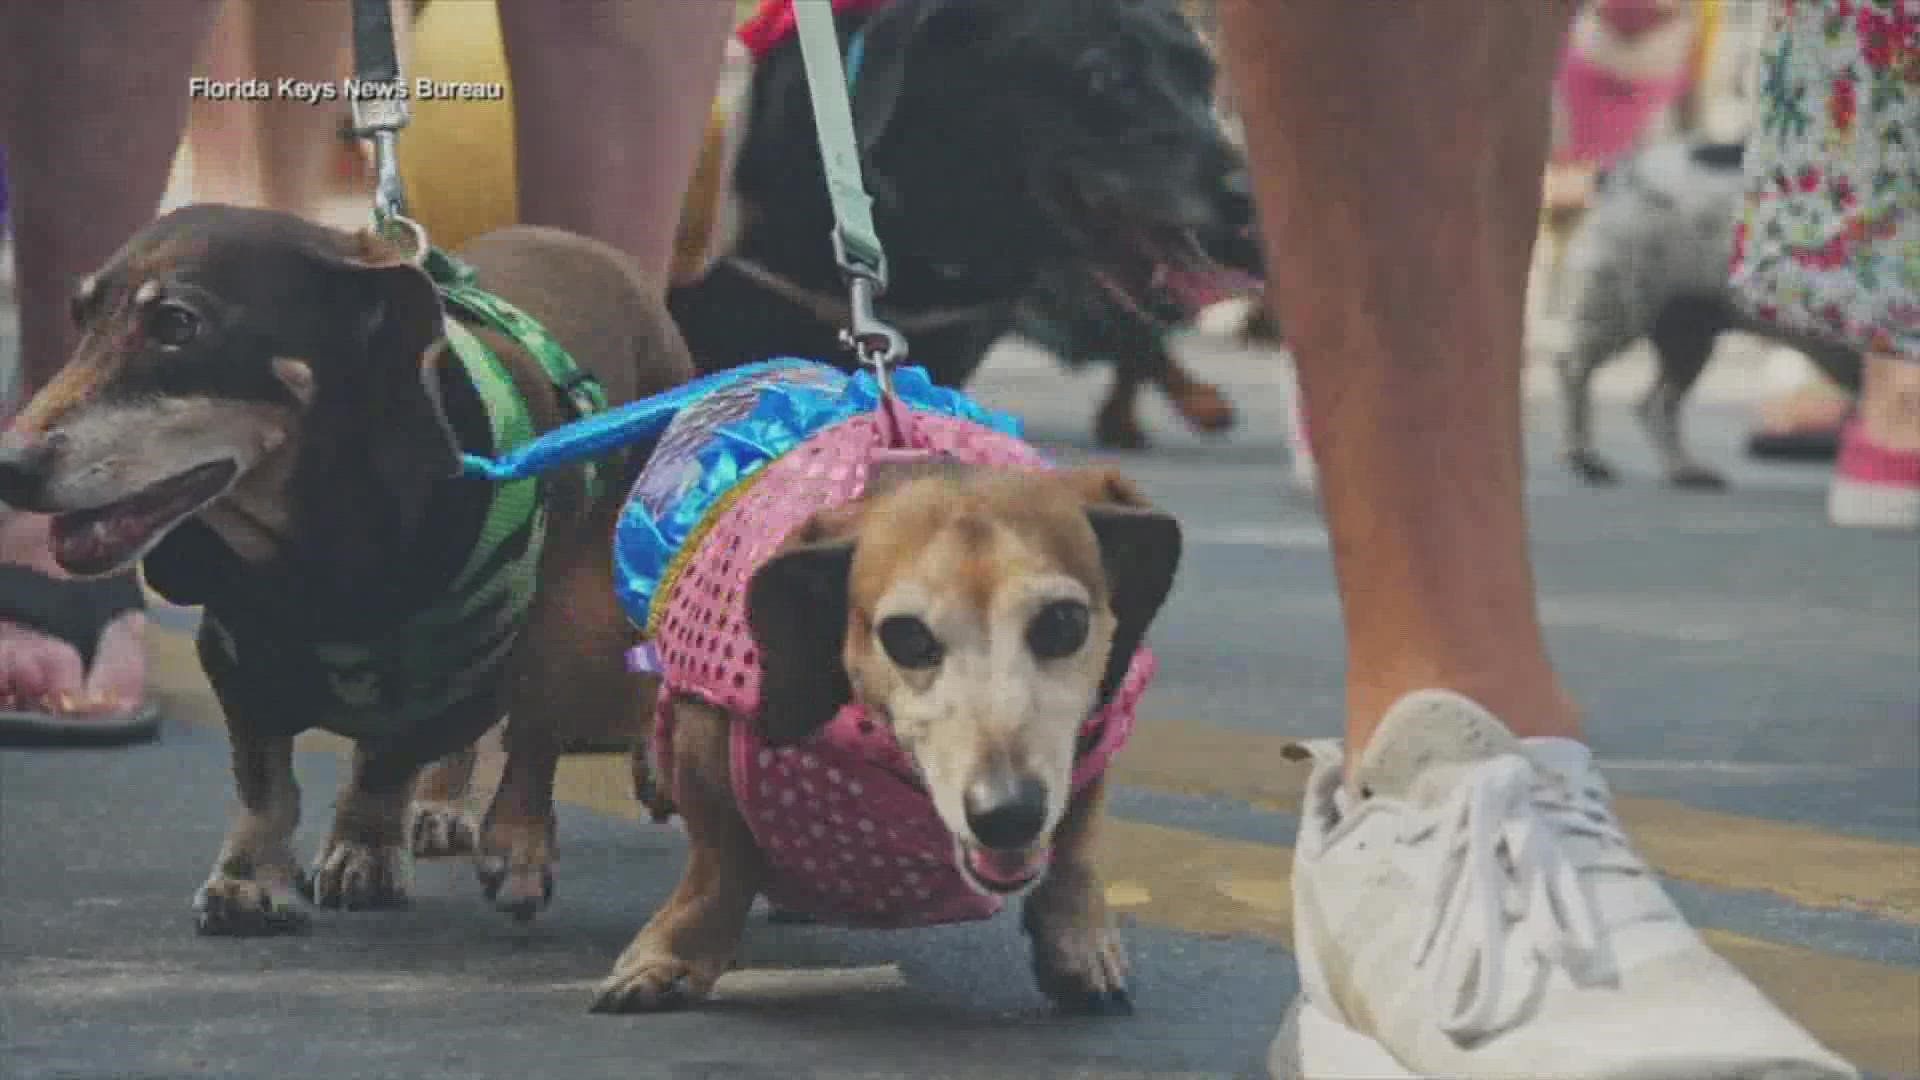 Participants included long haired and short haired dachshunds and plenty of other breeds.